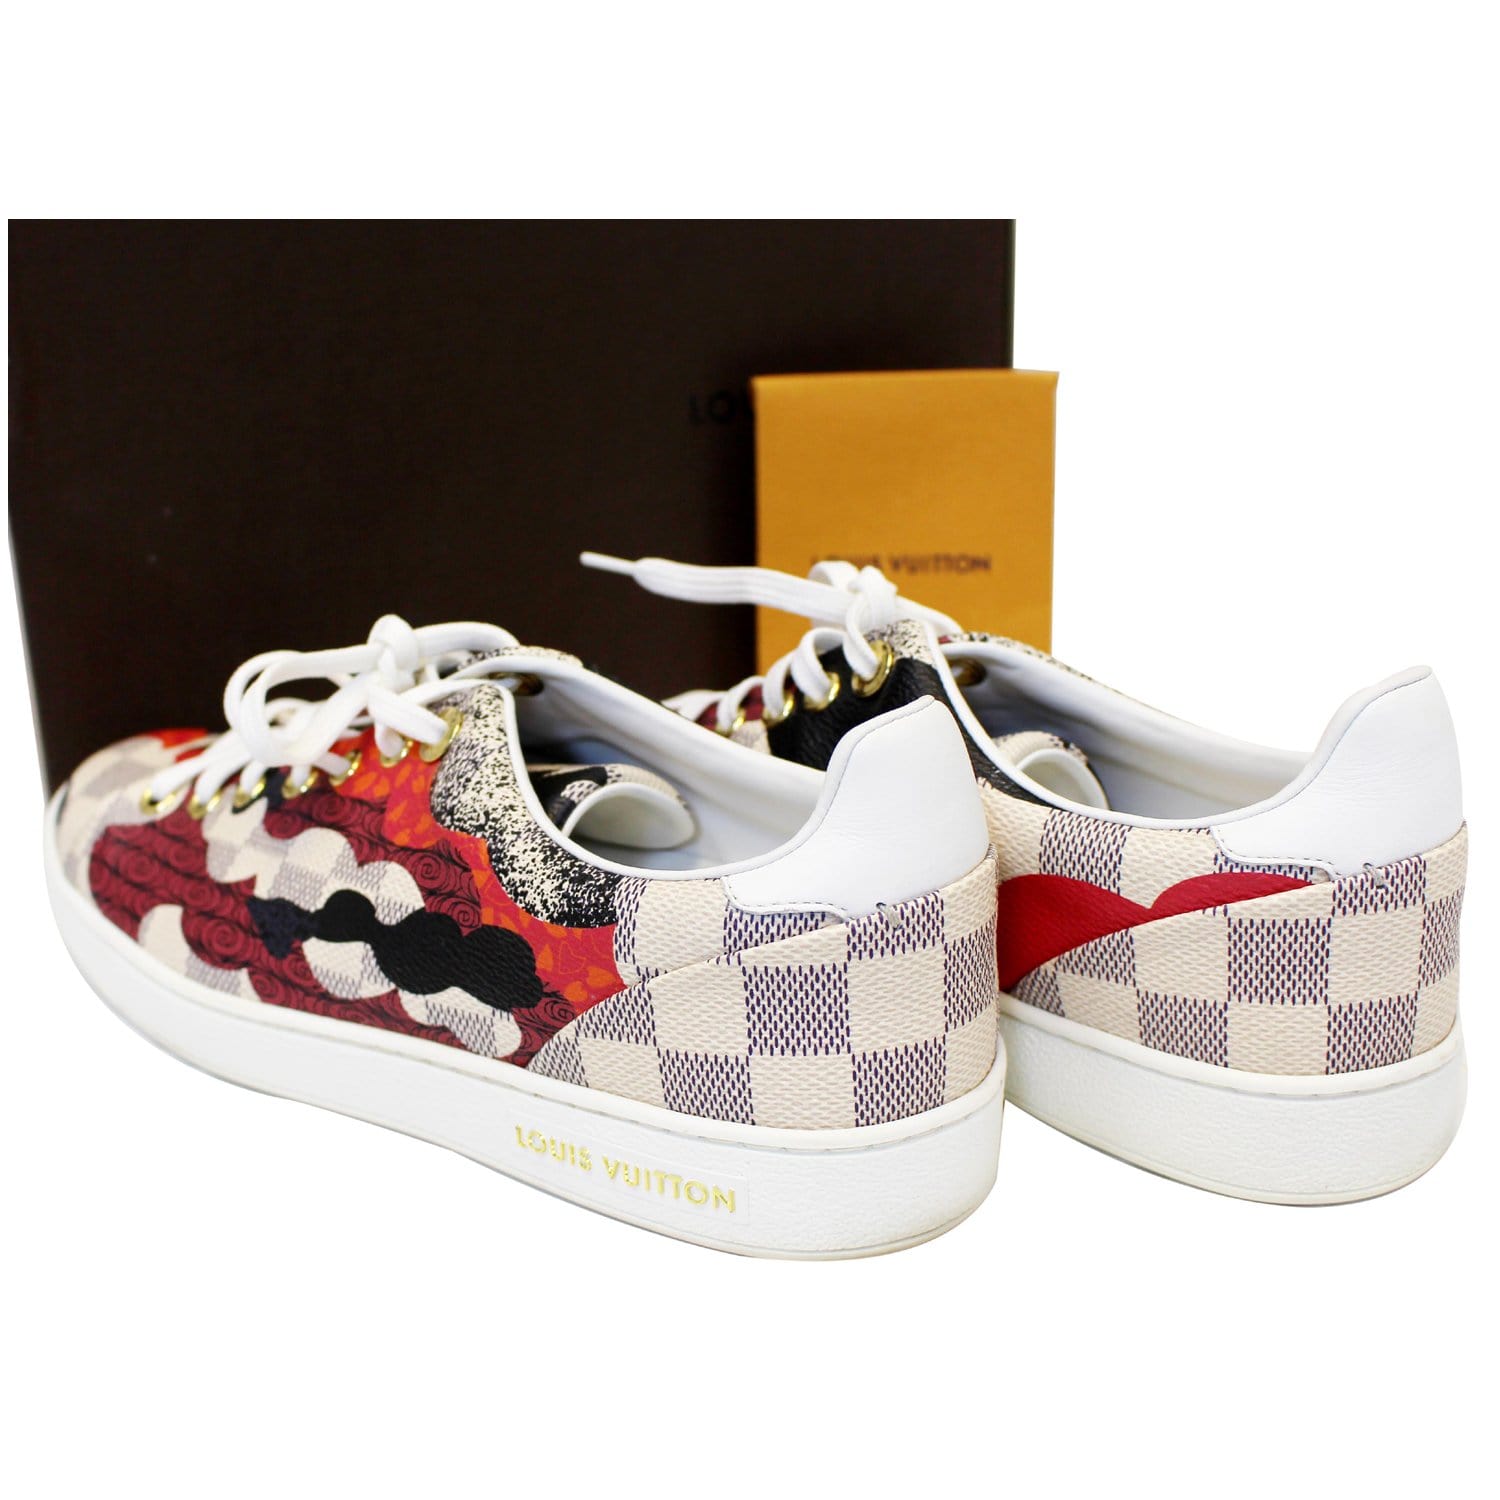 Louis Vuitton Damier Azur Sneakers - Size 40 ○ Labellov ○ Buy and Sell  Authentic Luxury